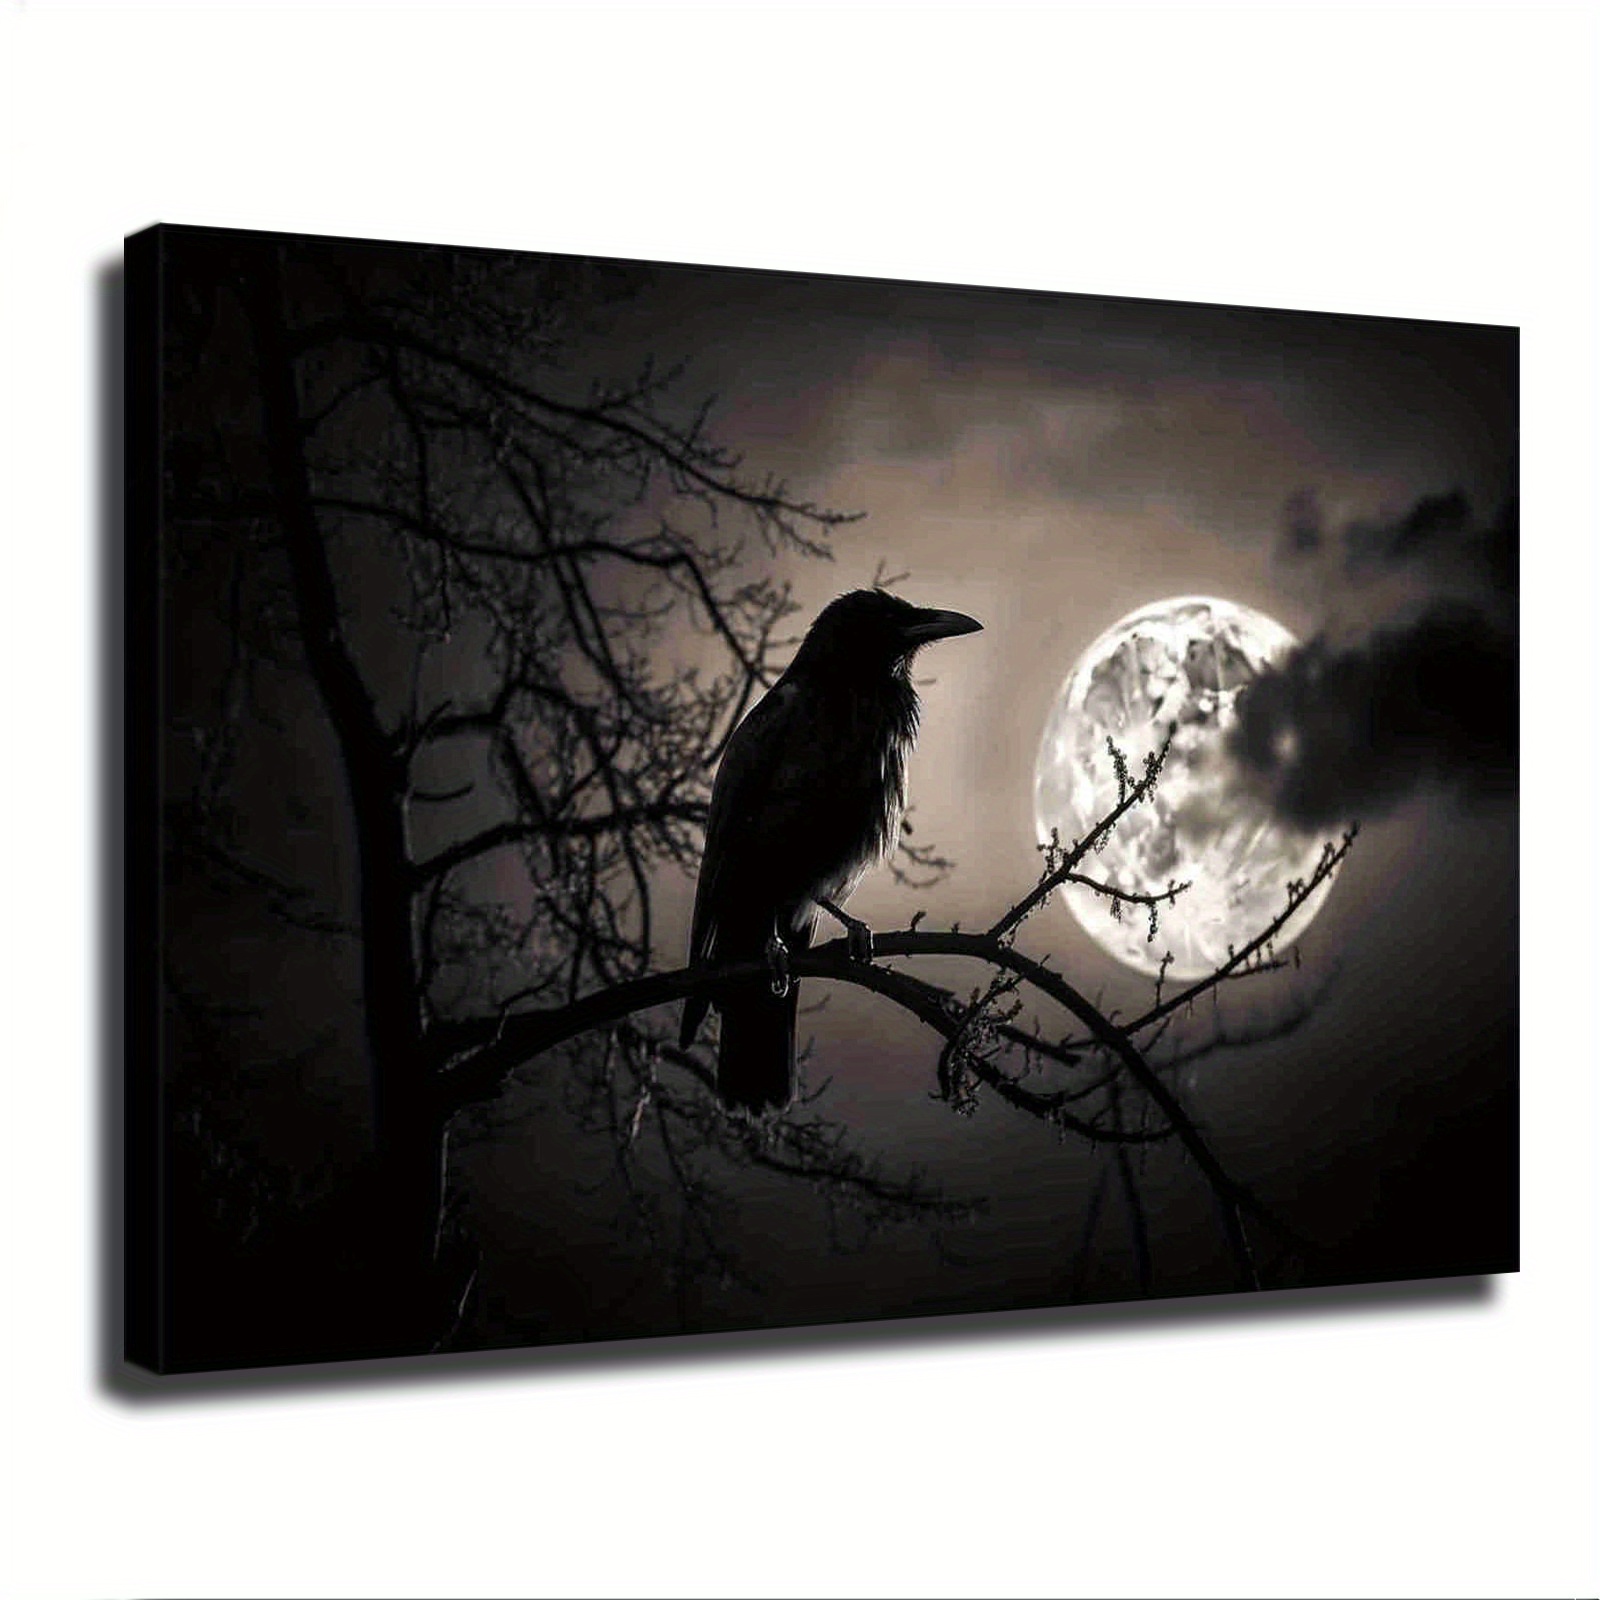 

1 Pc Wooden Framed Wall Art, Crow Silhouette Moon Black Grey Poster, Artwork Wall Painting For Gift, Home Living Room Office Cafe Wall Decor, Perfect Gift And Home Decoration